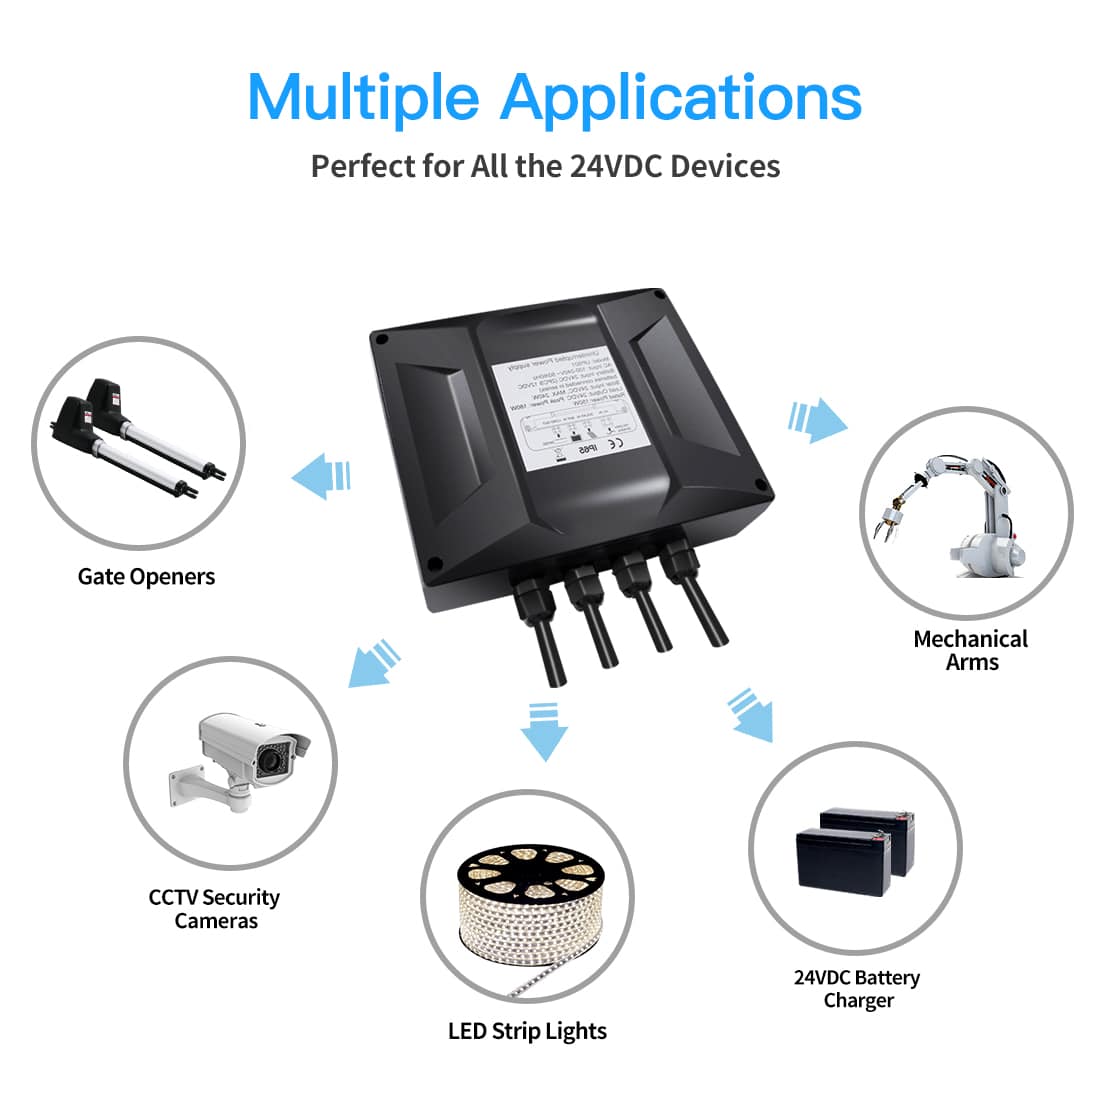 UPS01 100-240VAC to 24VDC Power Supply Multiple Applications